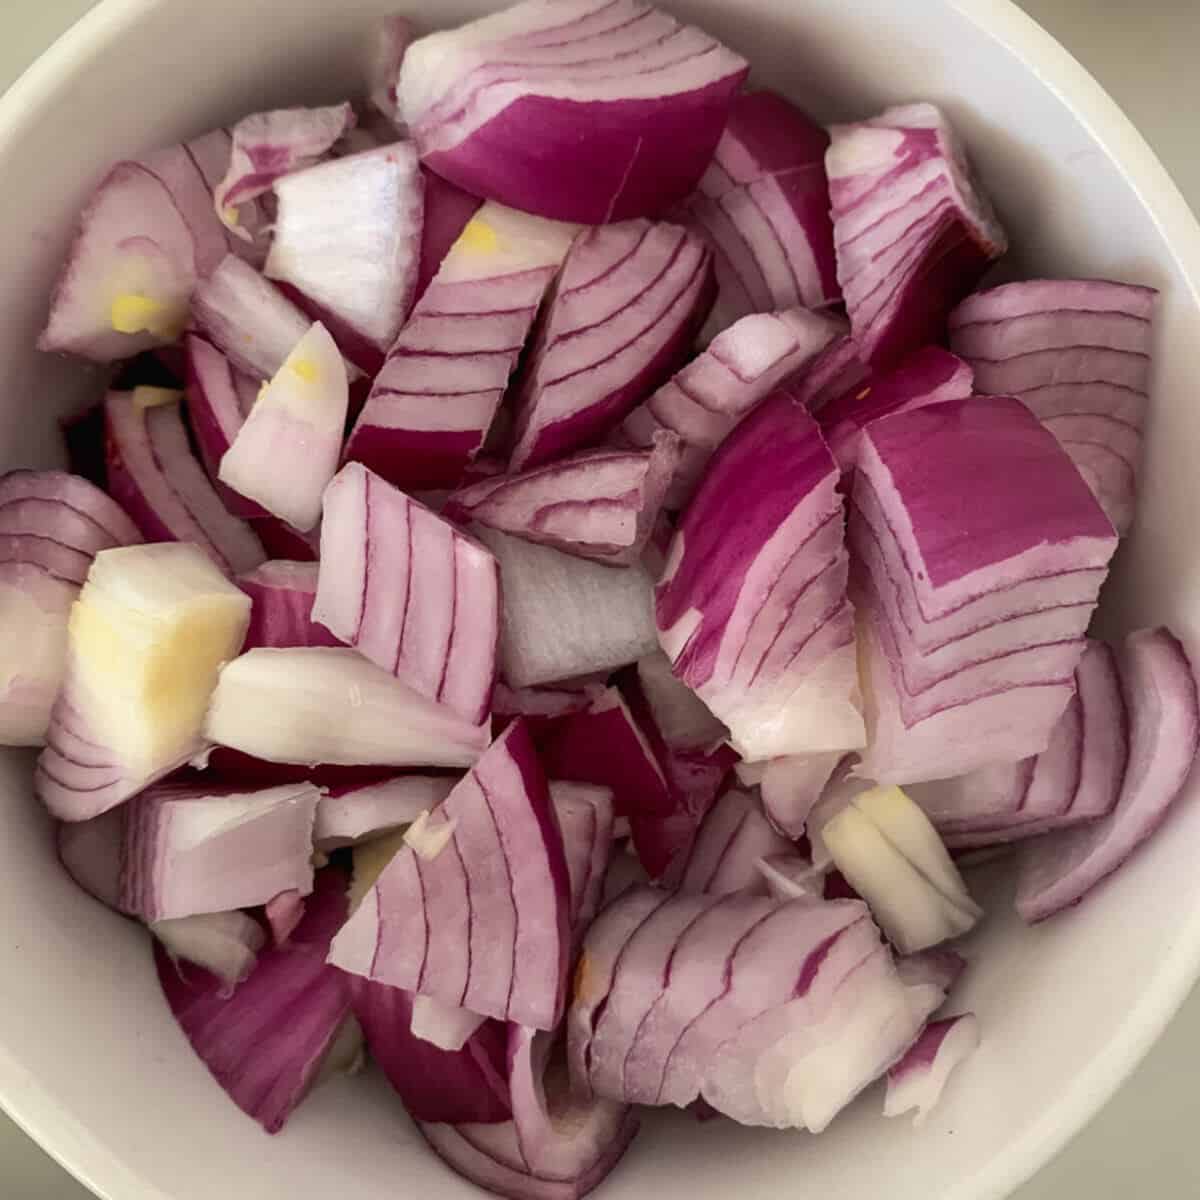 Chopped red onions placed in a round white bowl. 